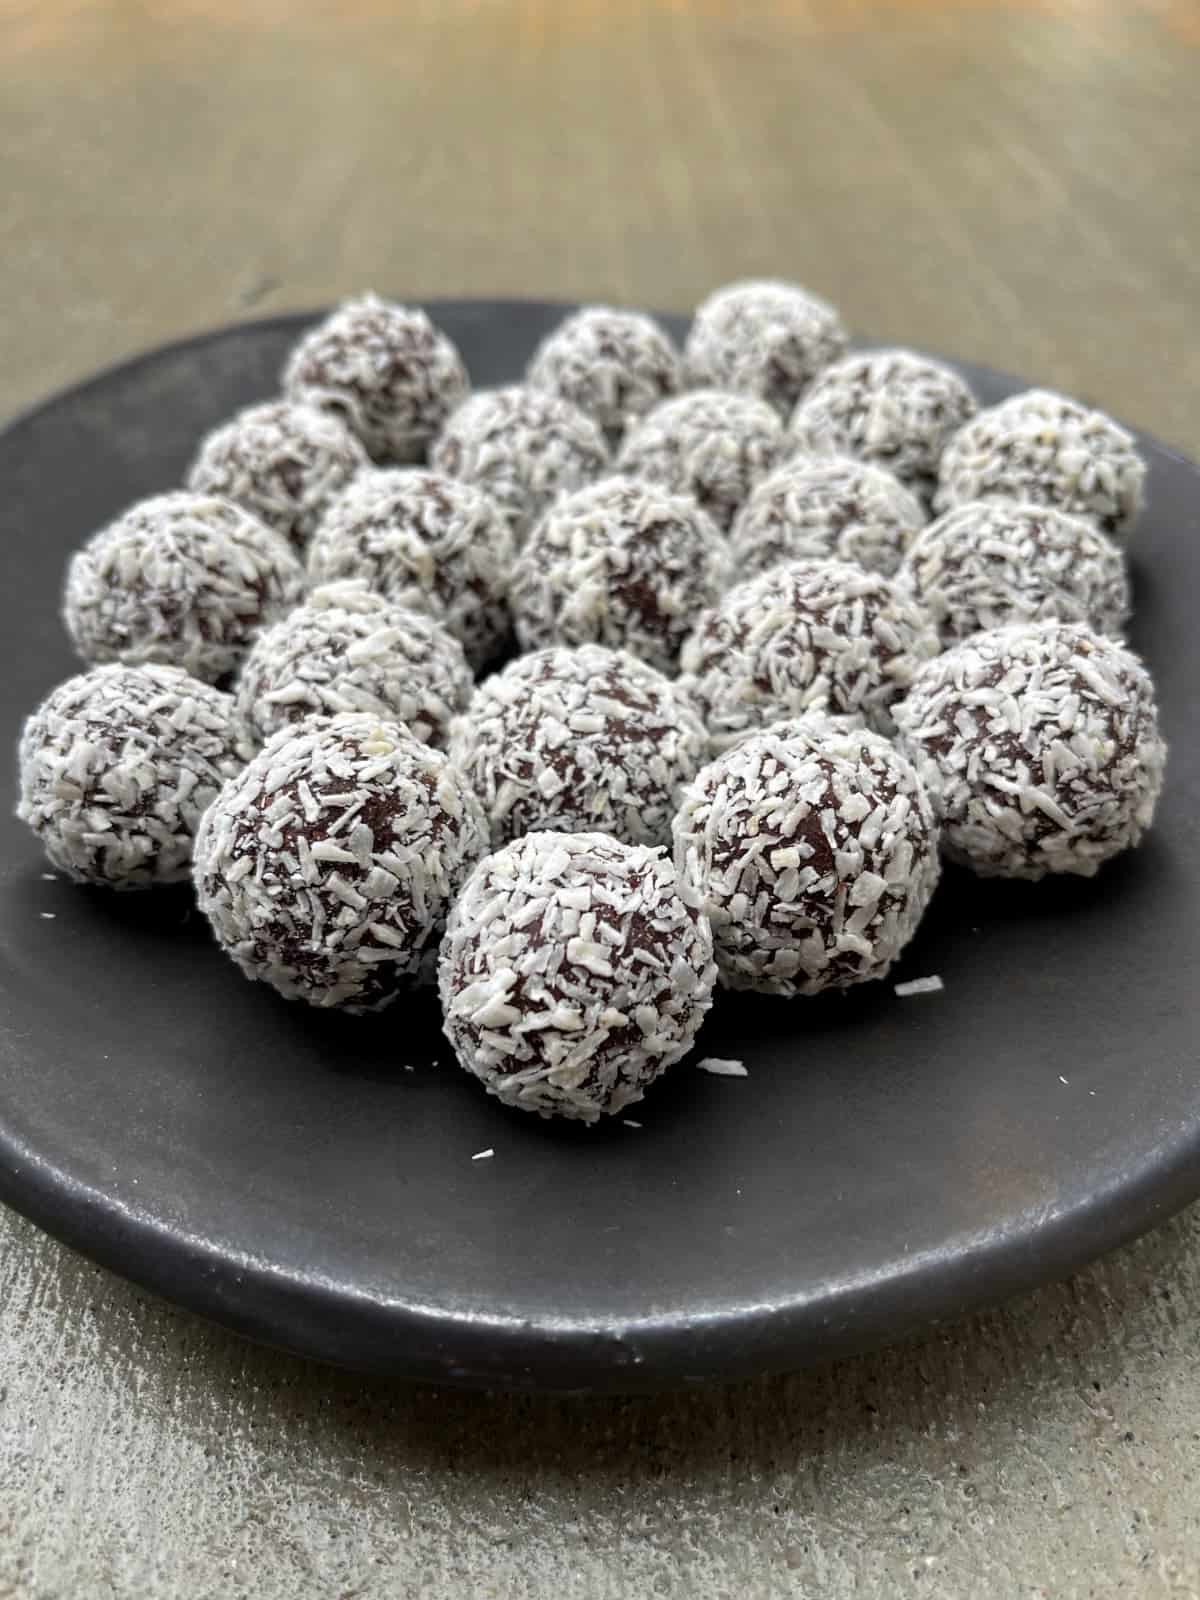 Easy Coconut Almond Truffles made healthier on a brown ceramic plate.